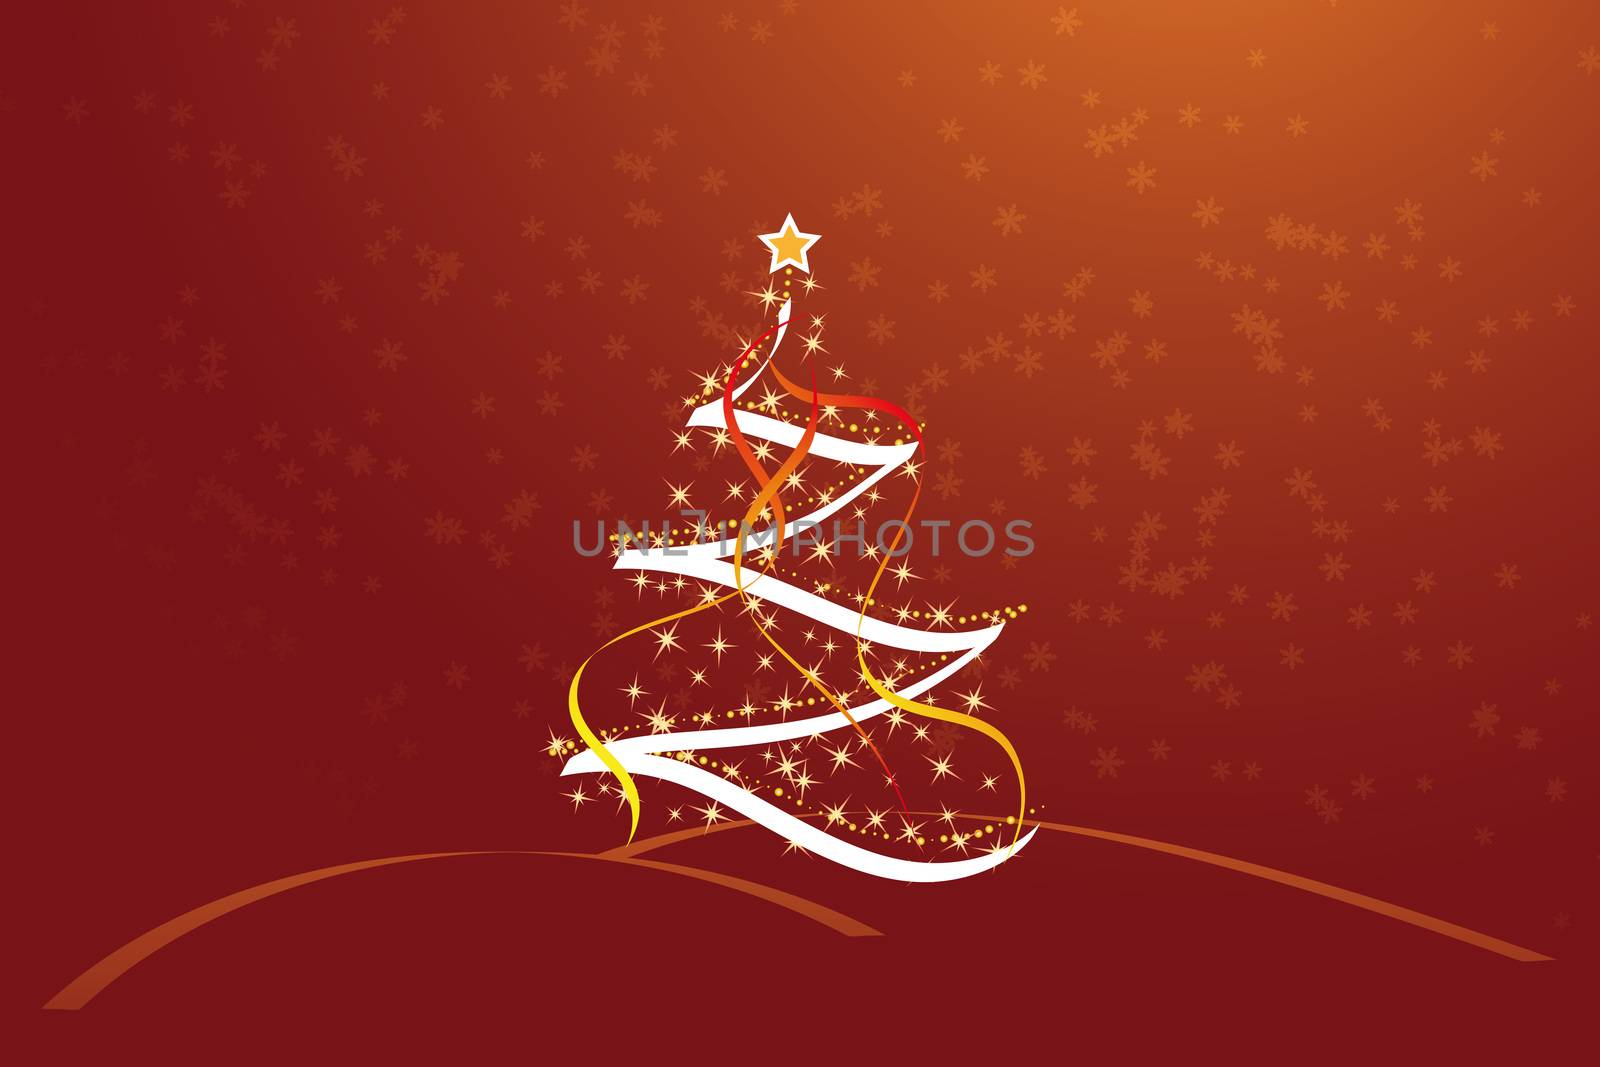 Christmas trees made out of stars dots and ribbons against a dark red background